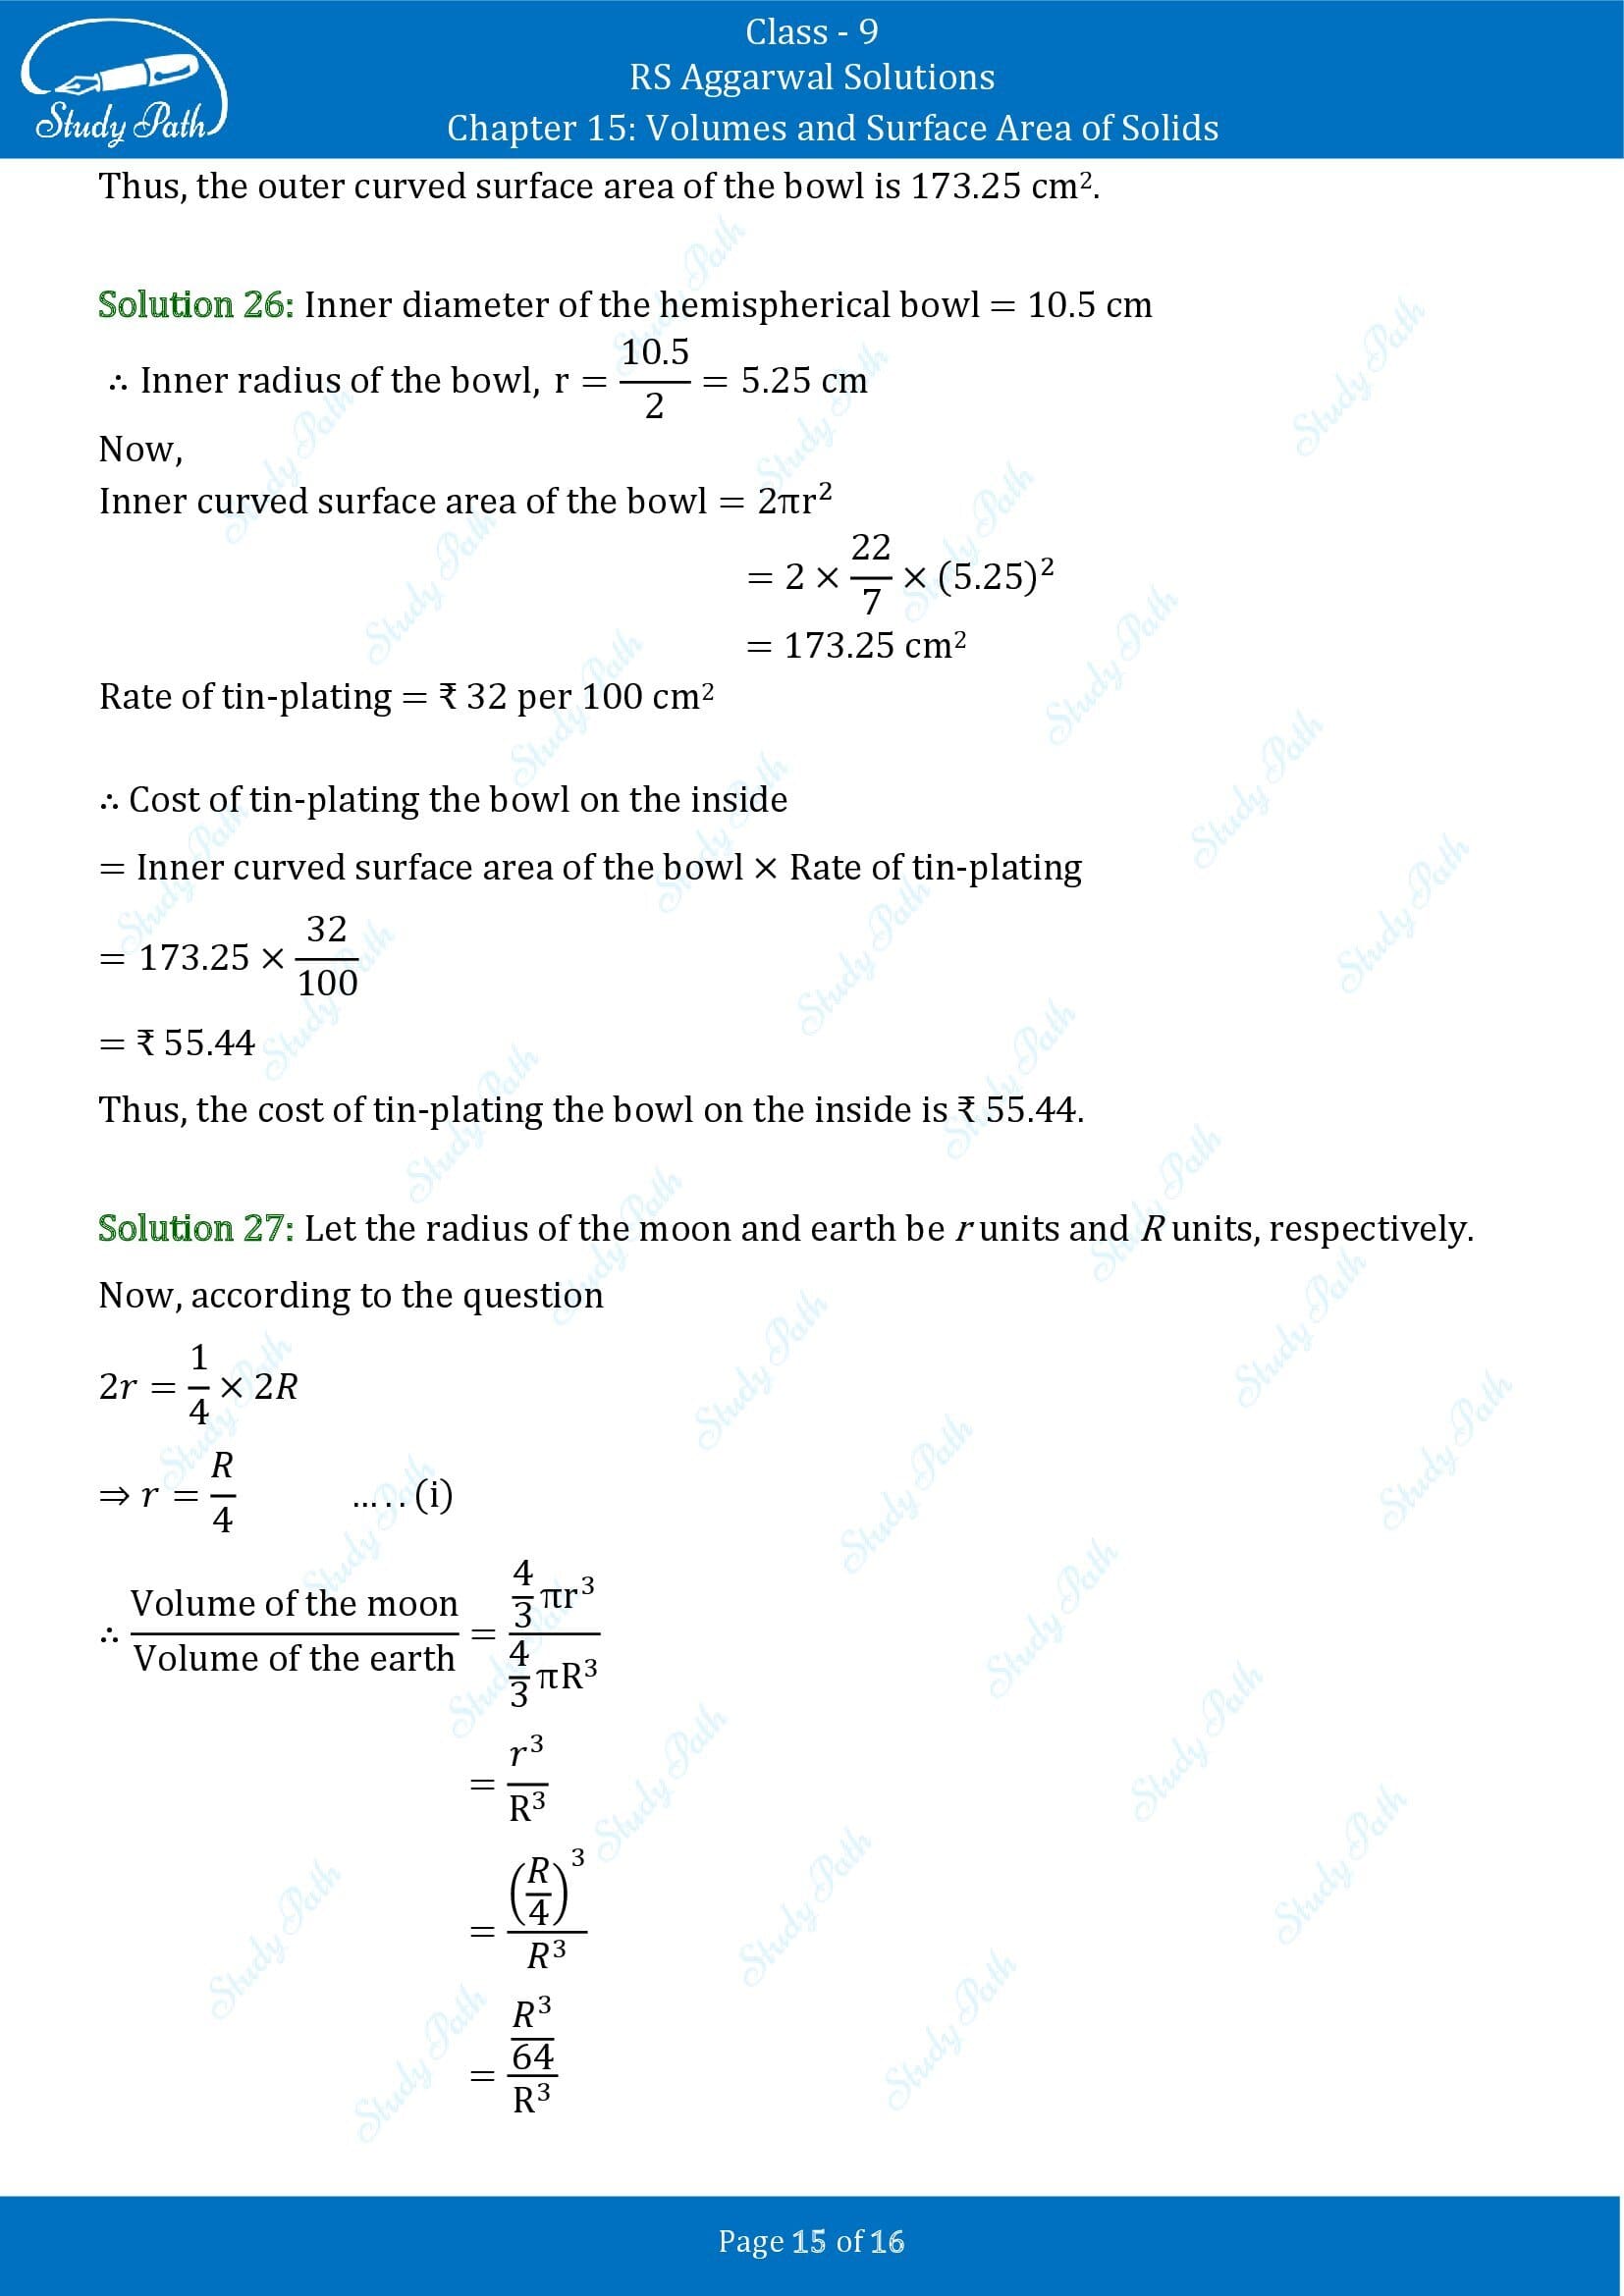 RS Aggarwal Solutions Class 9 Chapter 15 Volumes and Surface Area of Solids Exercise 15D 00015